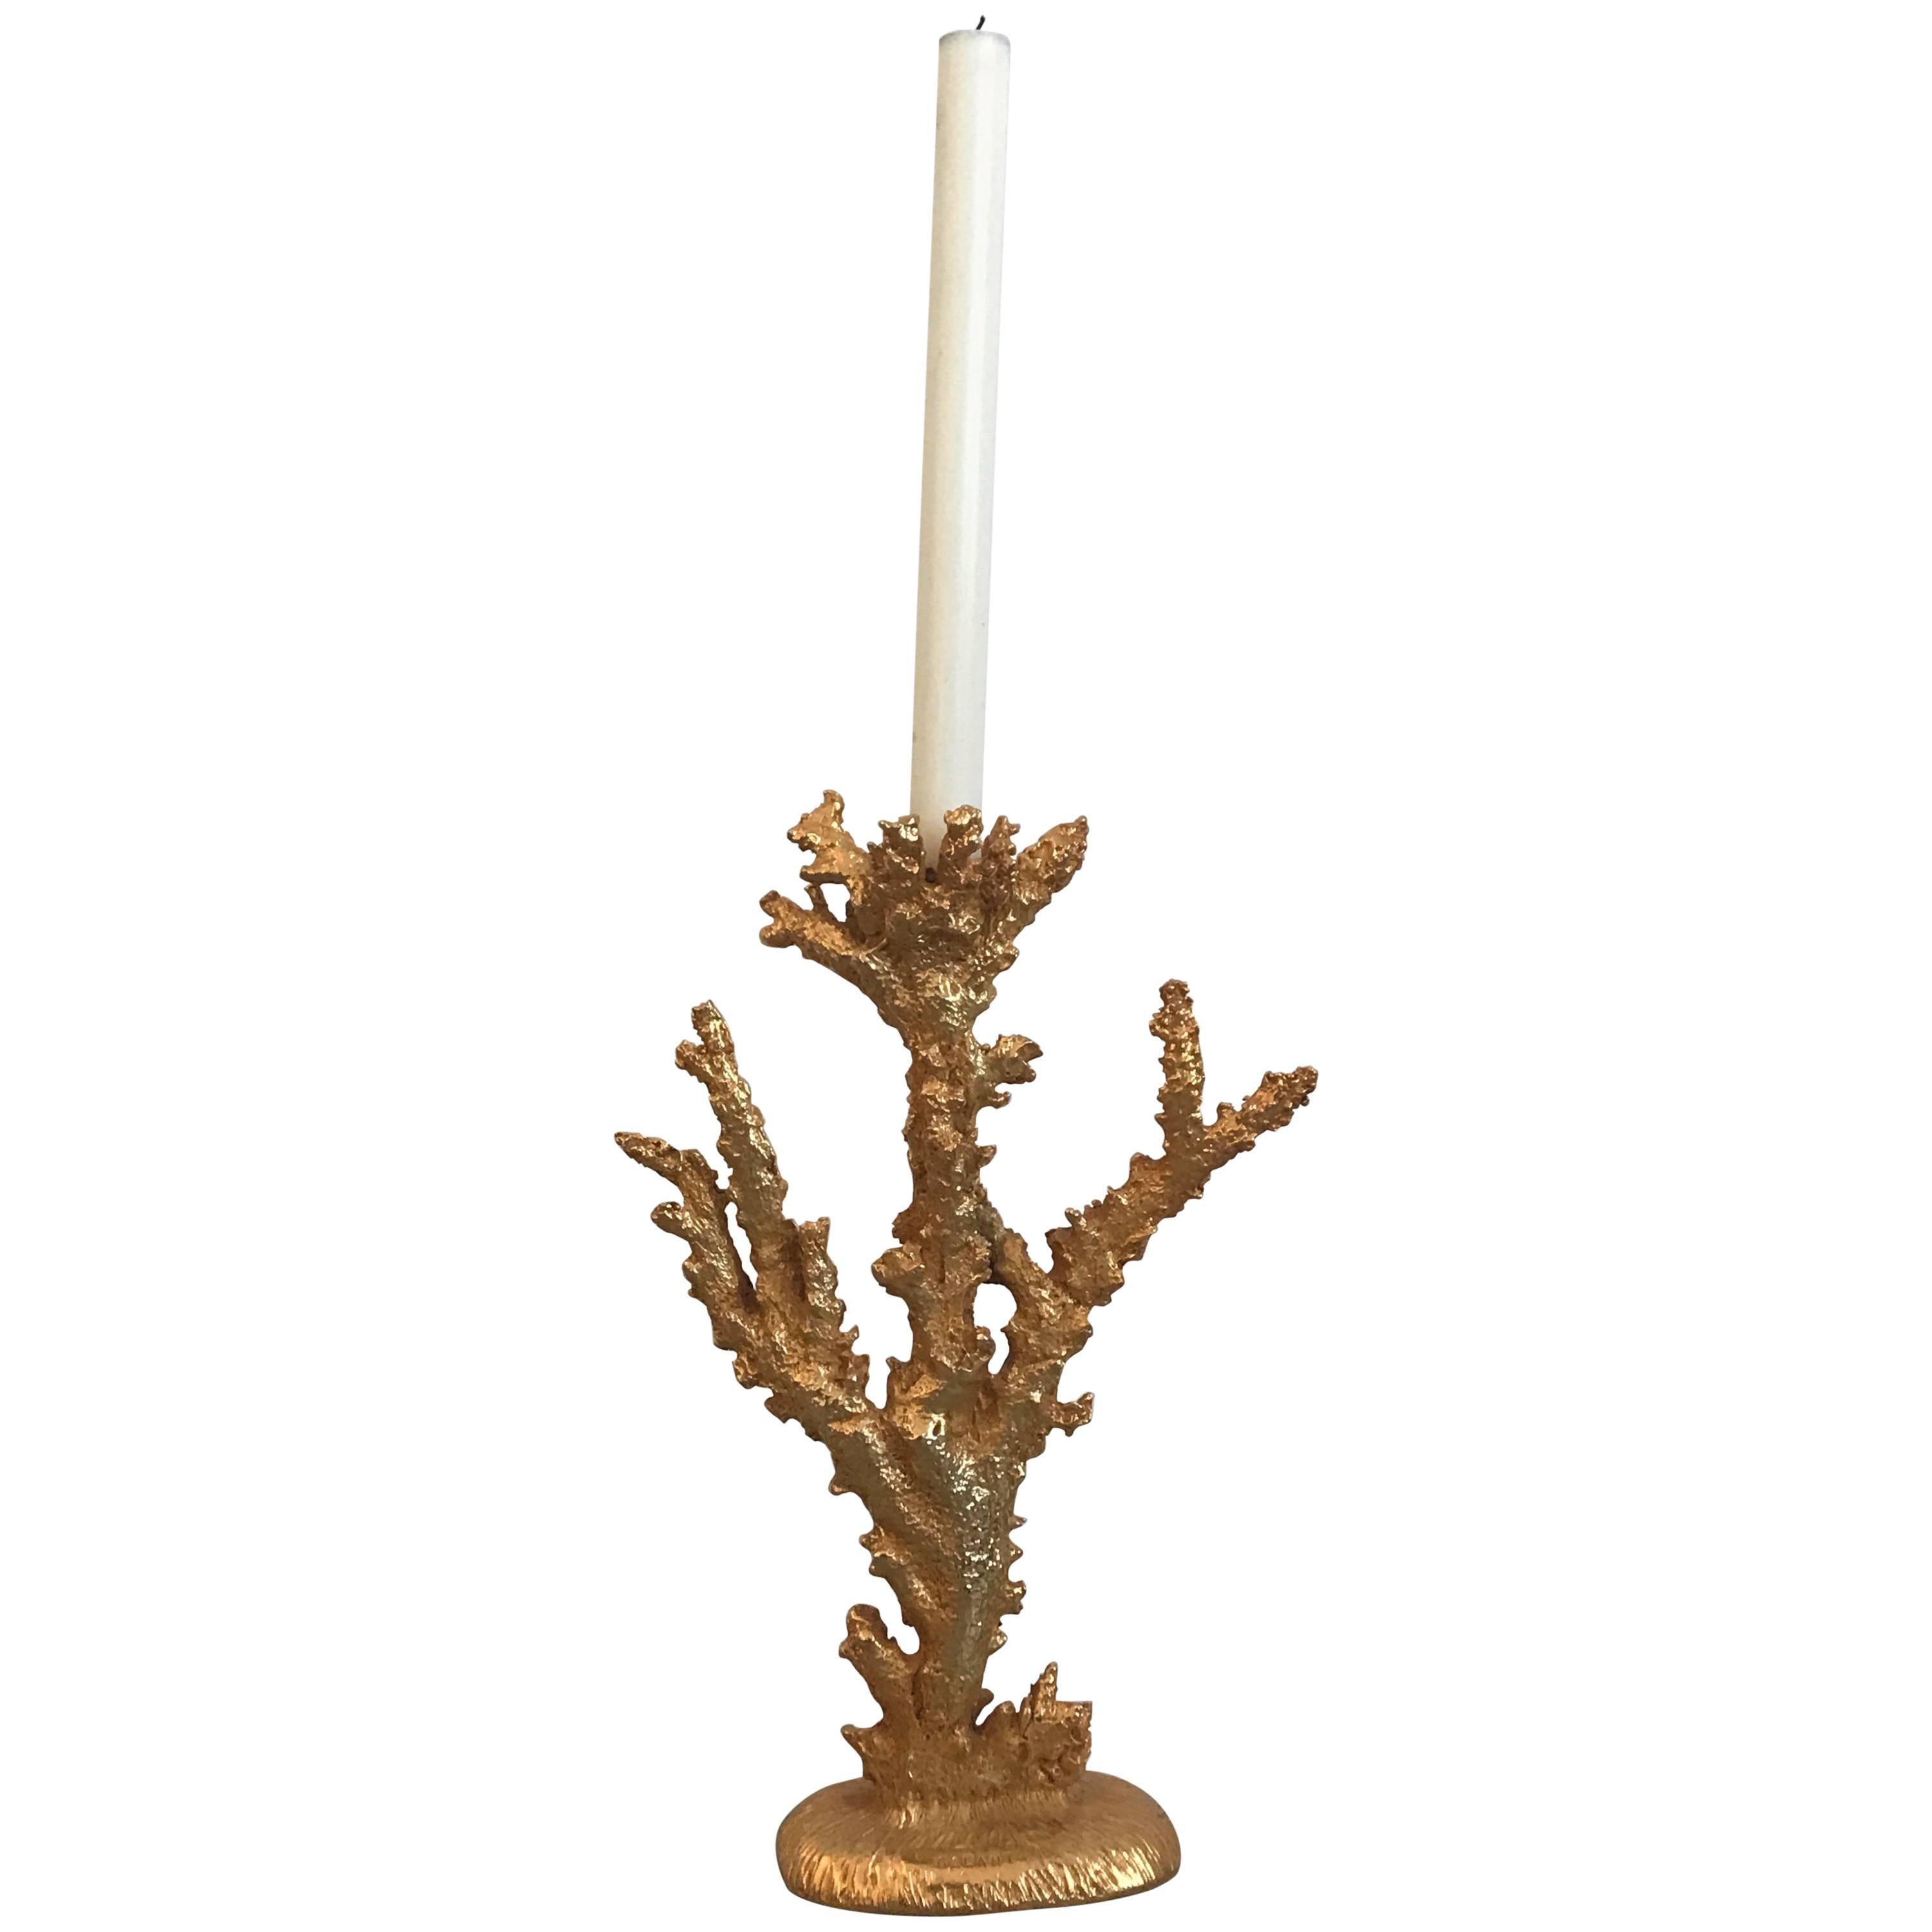 Gilded "Morea" Candlestick For Sale